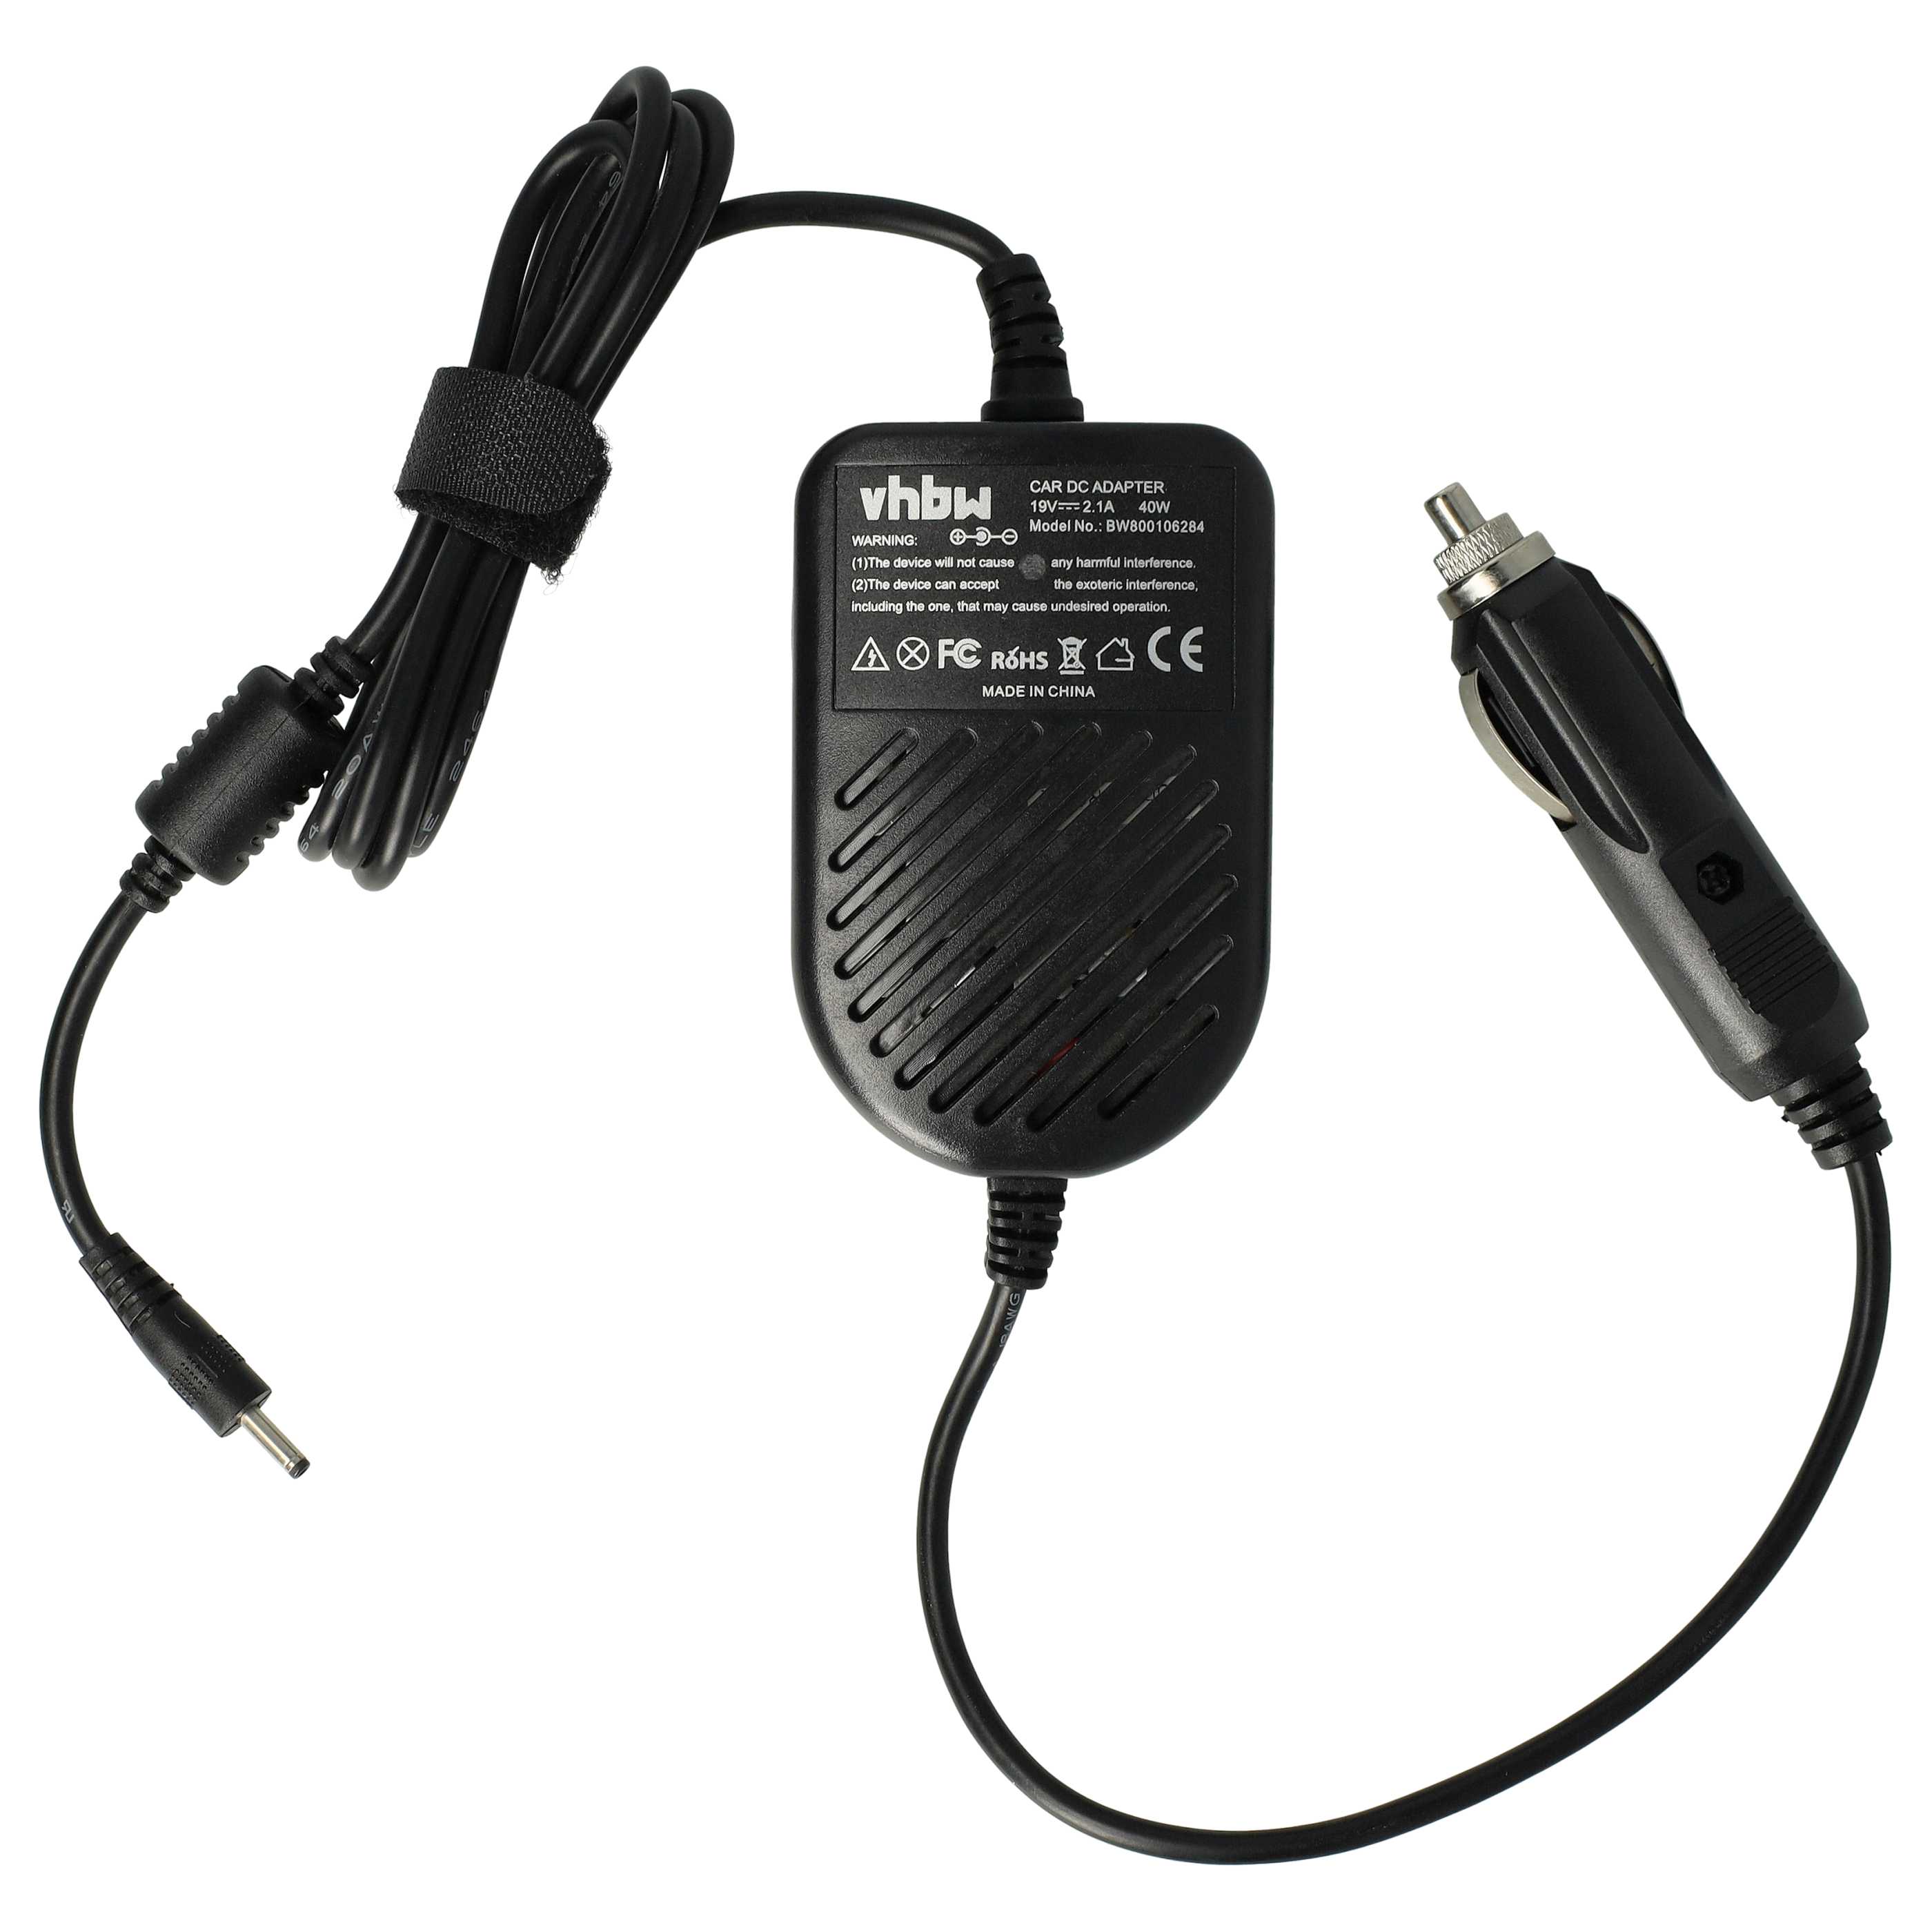 Chargeur auto remplace Samsung AA-PA2N40L, AA-PA3NS40/US, AA-PA2N40S, AD-4019 pour ordinateur portable - 2,1 A